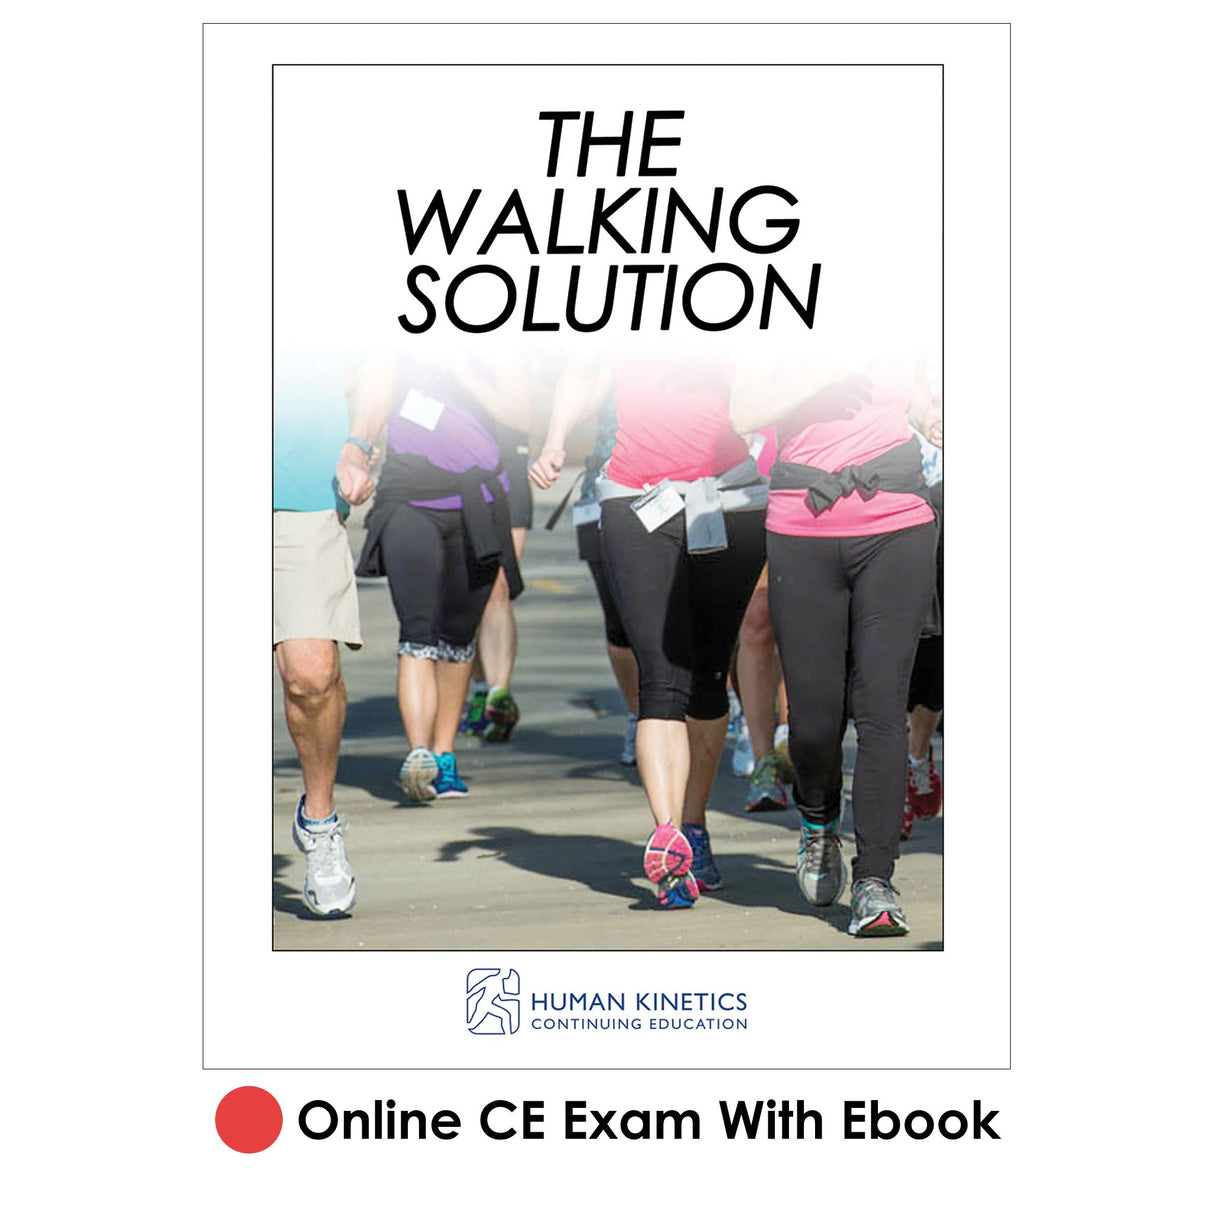 Walking Solution Online CE Exam With Ebook, The